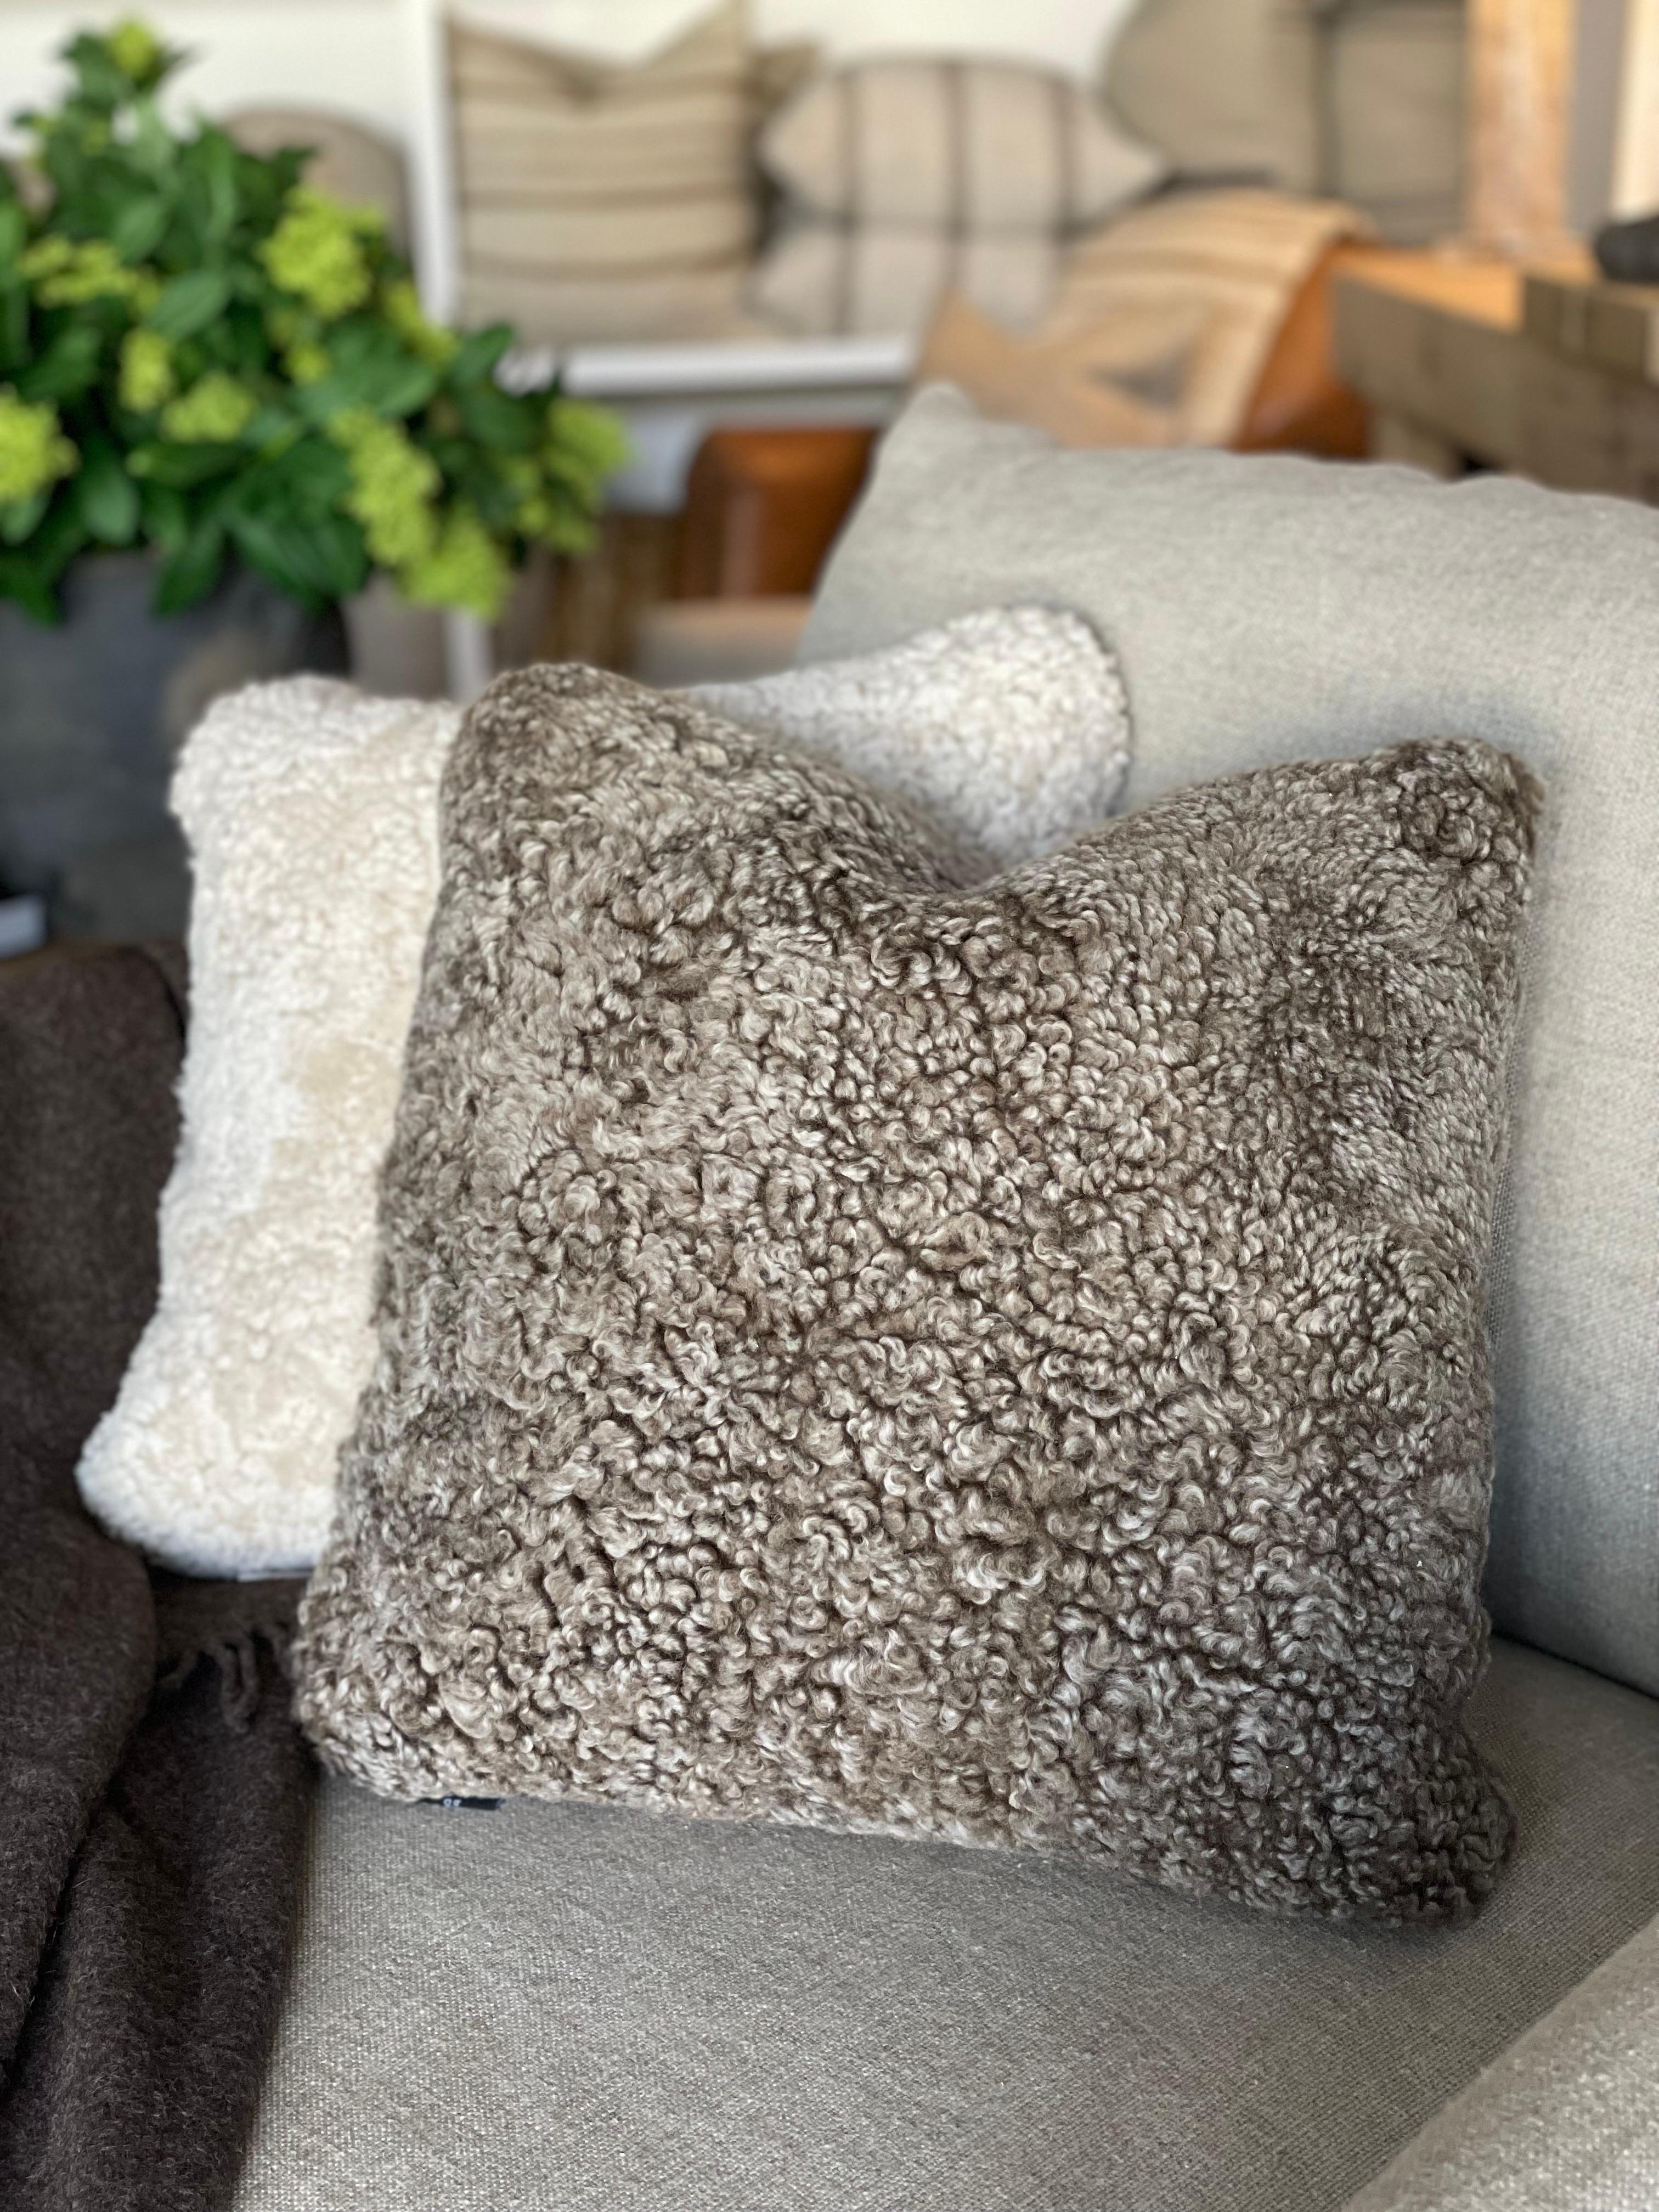 This beautiful rectangular cushion is made of curly sheepskin from New Zealand. Double sided pillow. This makes the cushion even softer and gives it a complete, warm look.

Size: 16 x 16 inc.  40 x 40 cm. 
Type: curly, short wool
Coat thickness: